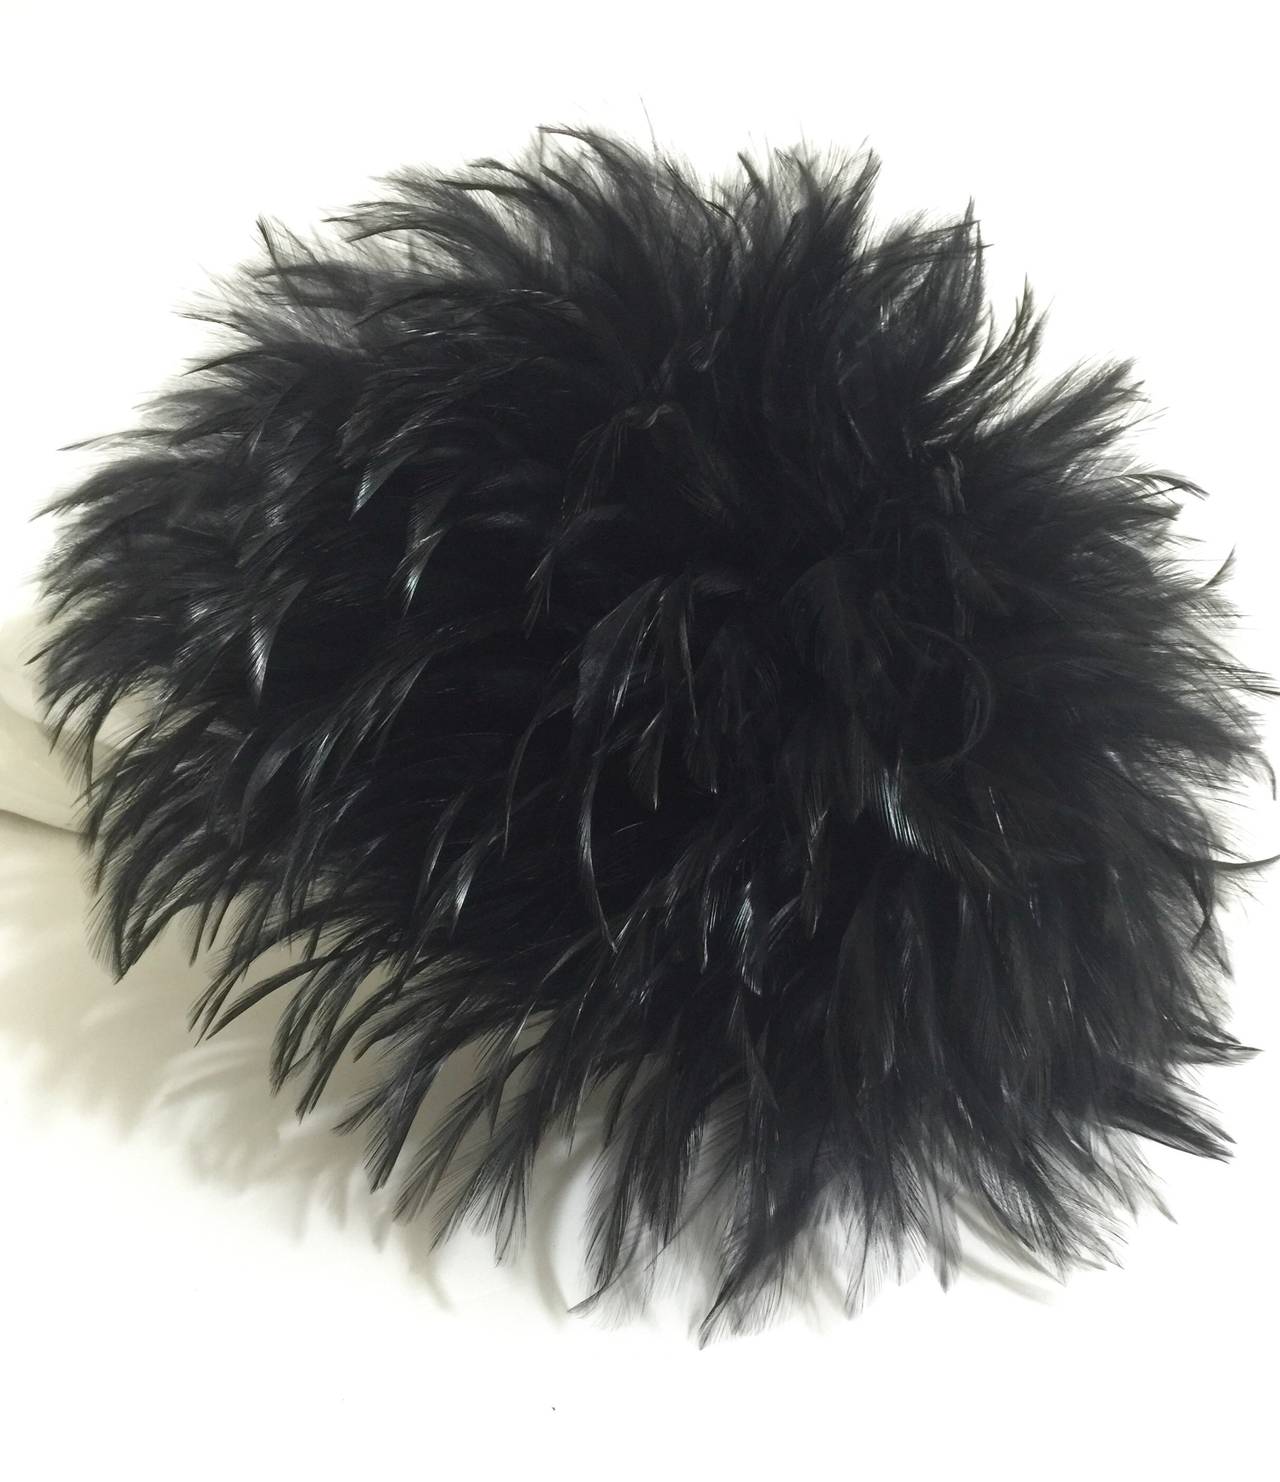 The height of chic is this magnificent Chanel hat  covered in black feathers. The feathers move and sway with you. Lined in satin.
In mint condition with Chanel tags.